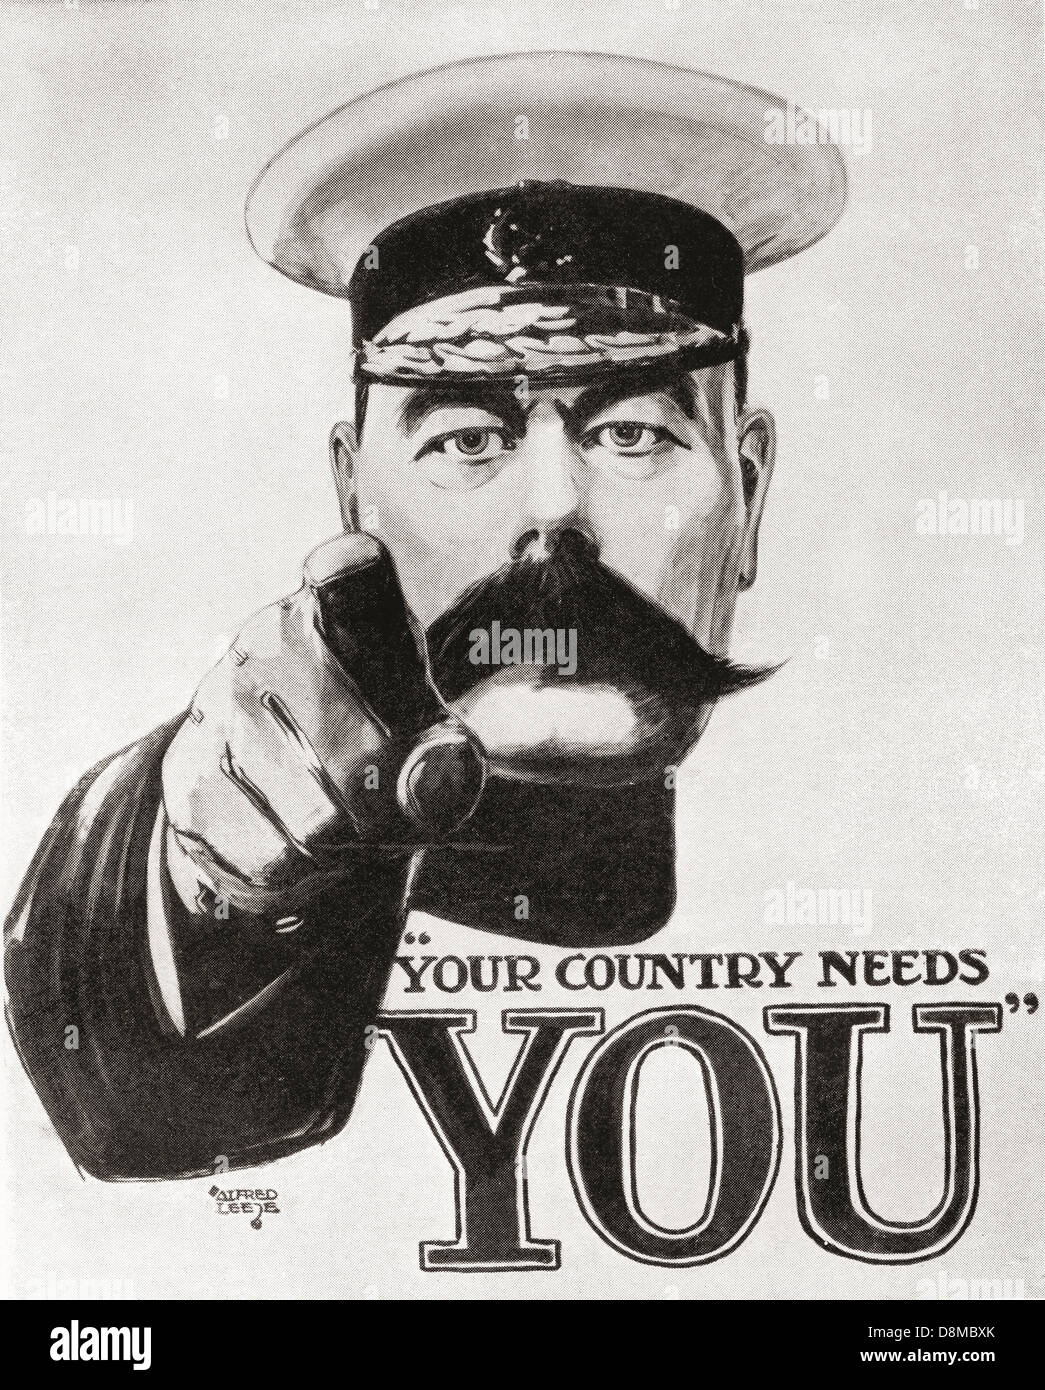 Your Country Needs You. Famous Kitchener World War One recruitment poster. Stock Photo